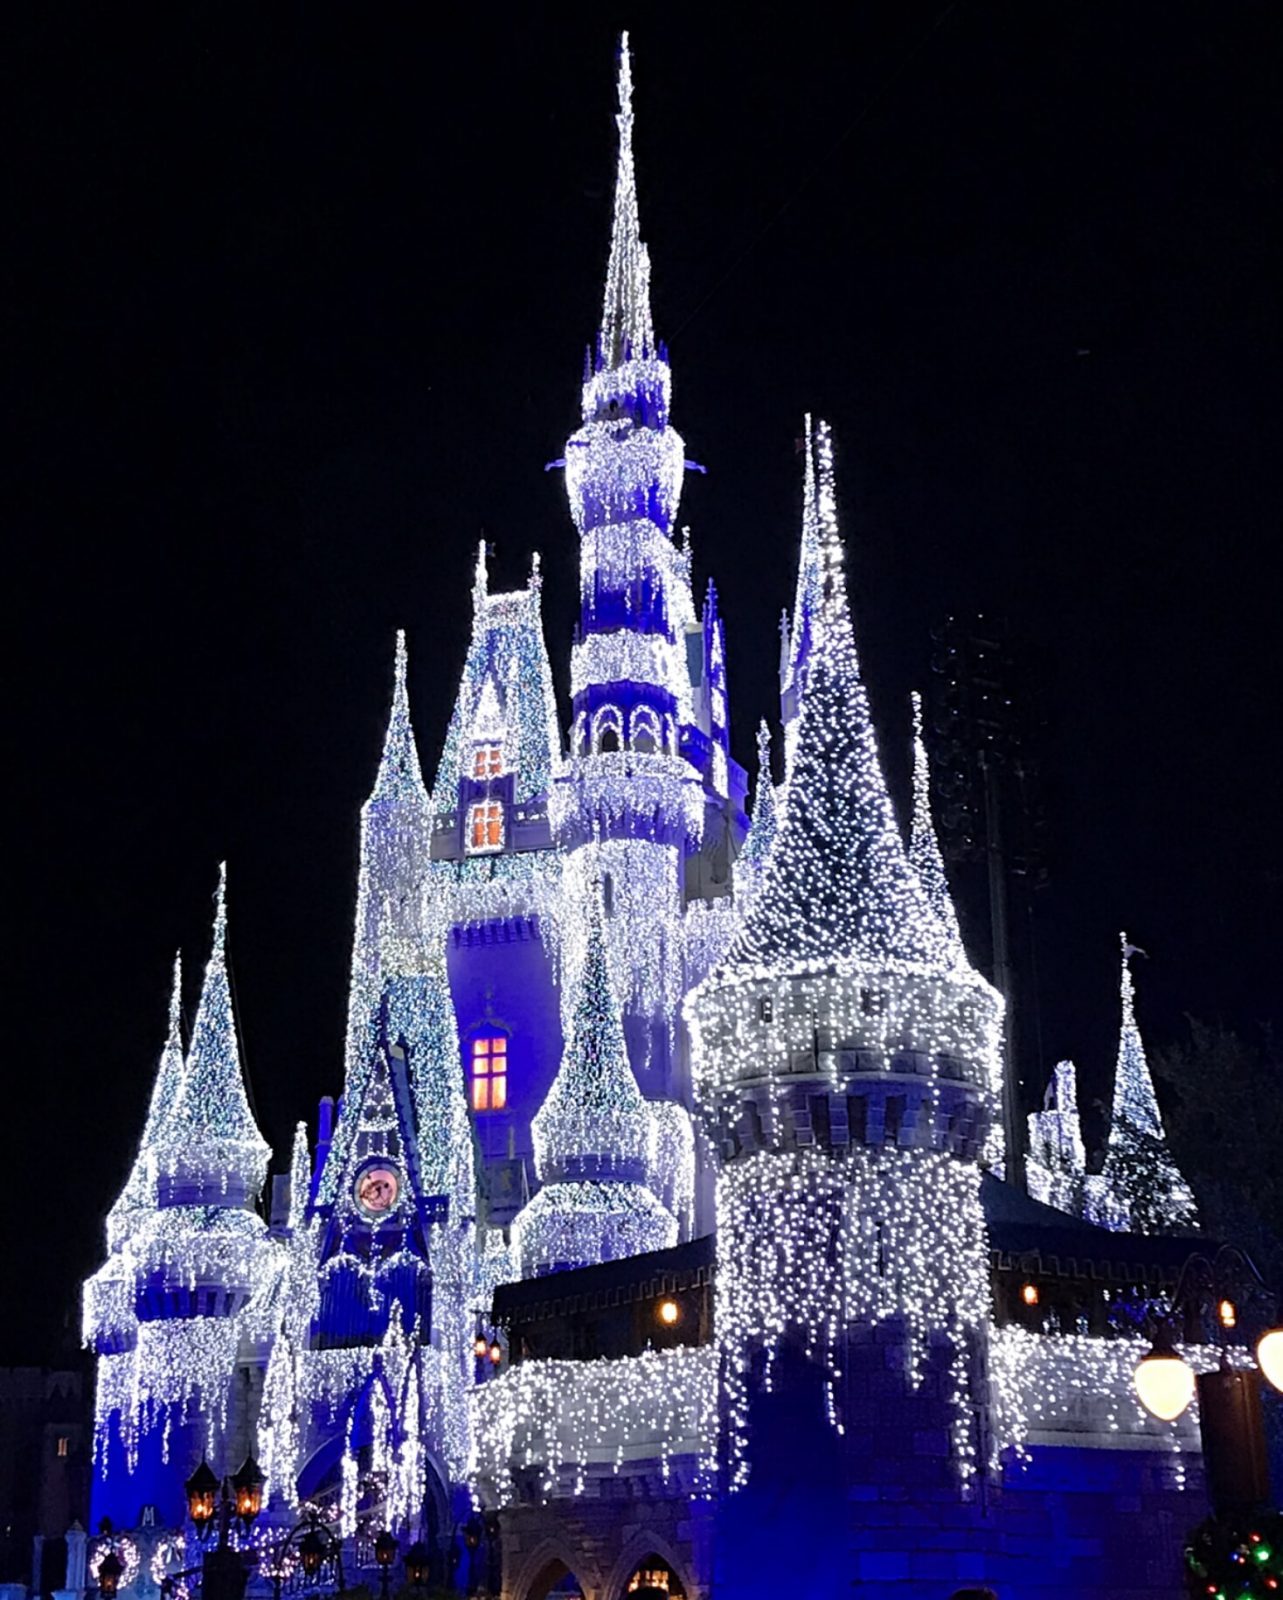 Cinderella's castle lit up at night with holiday lights